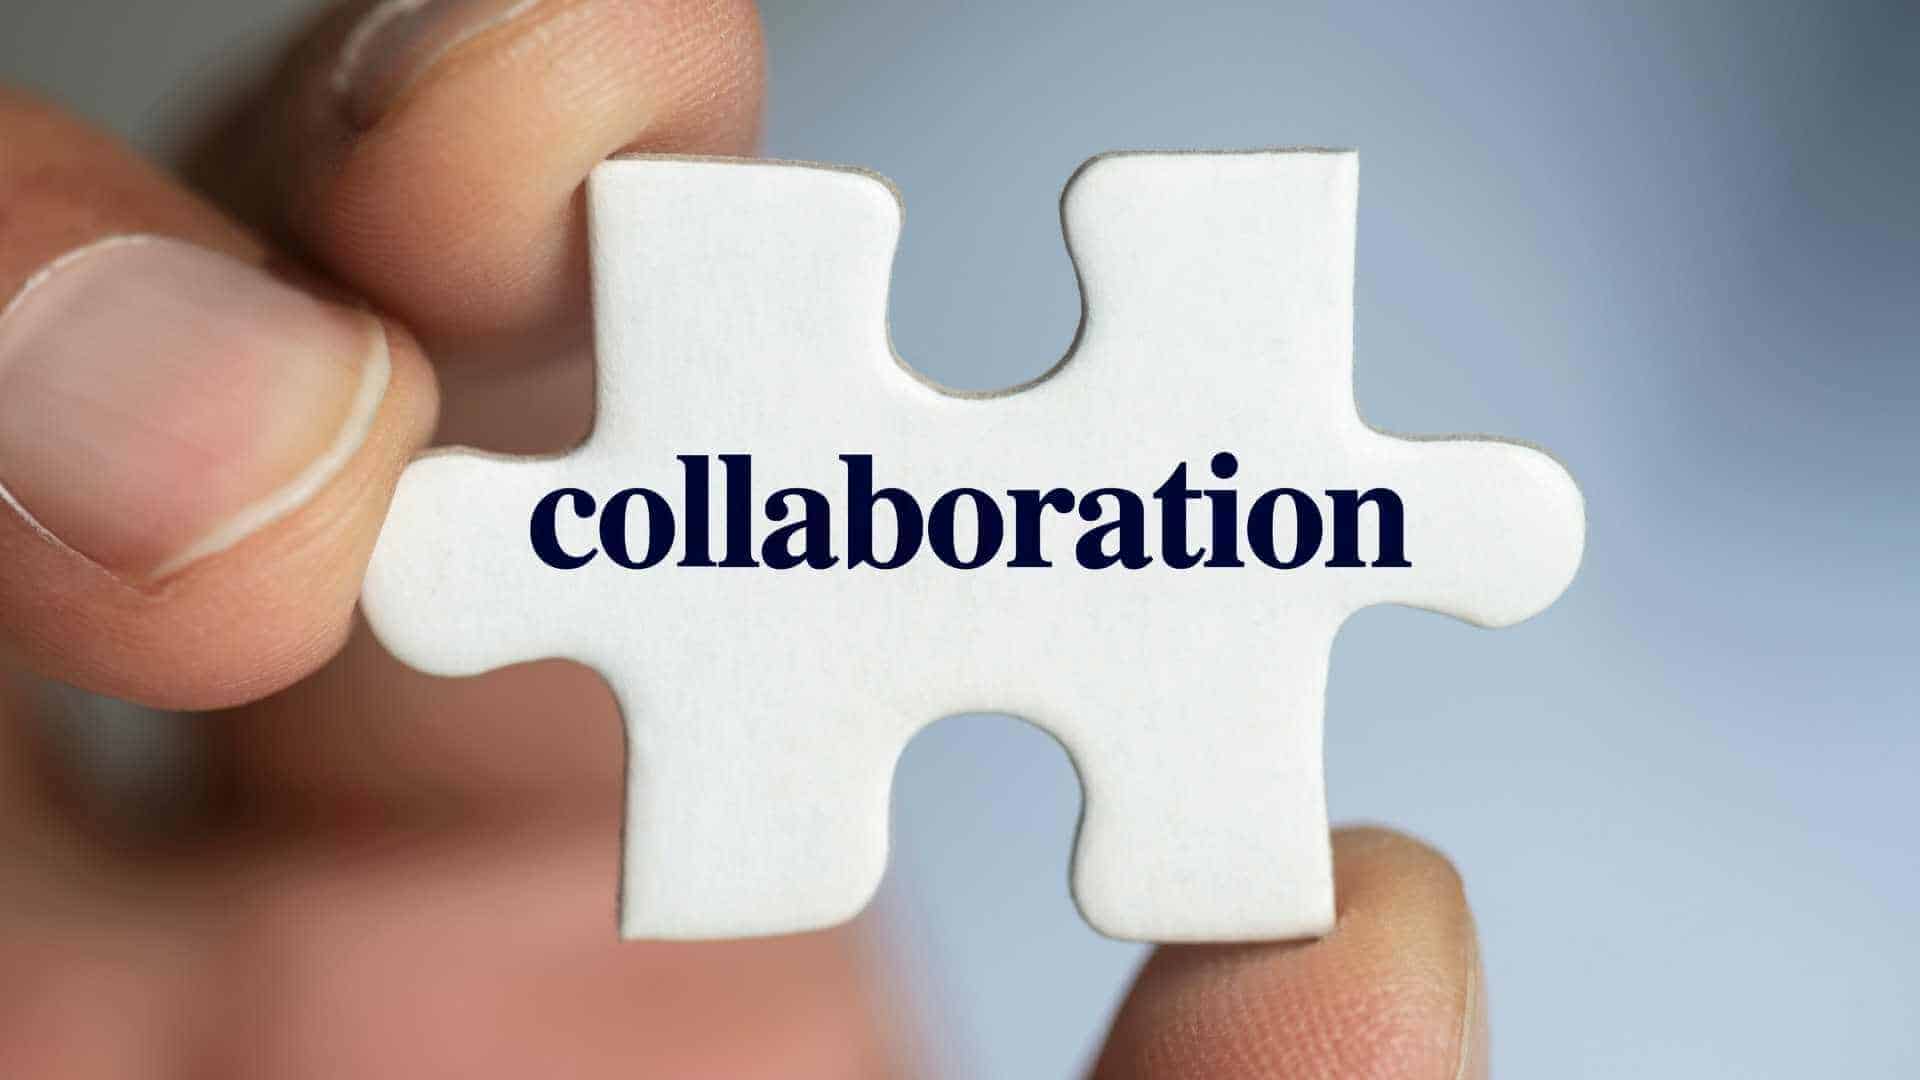 collaboration is the c that's missing